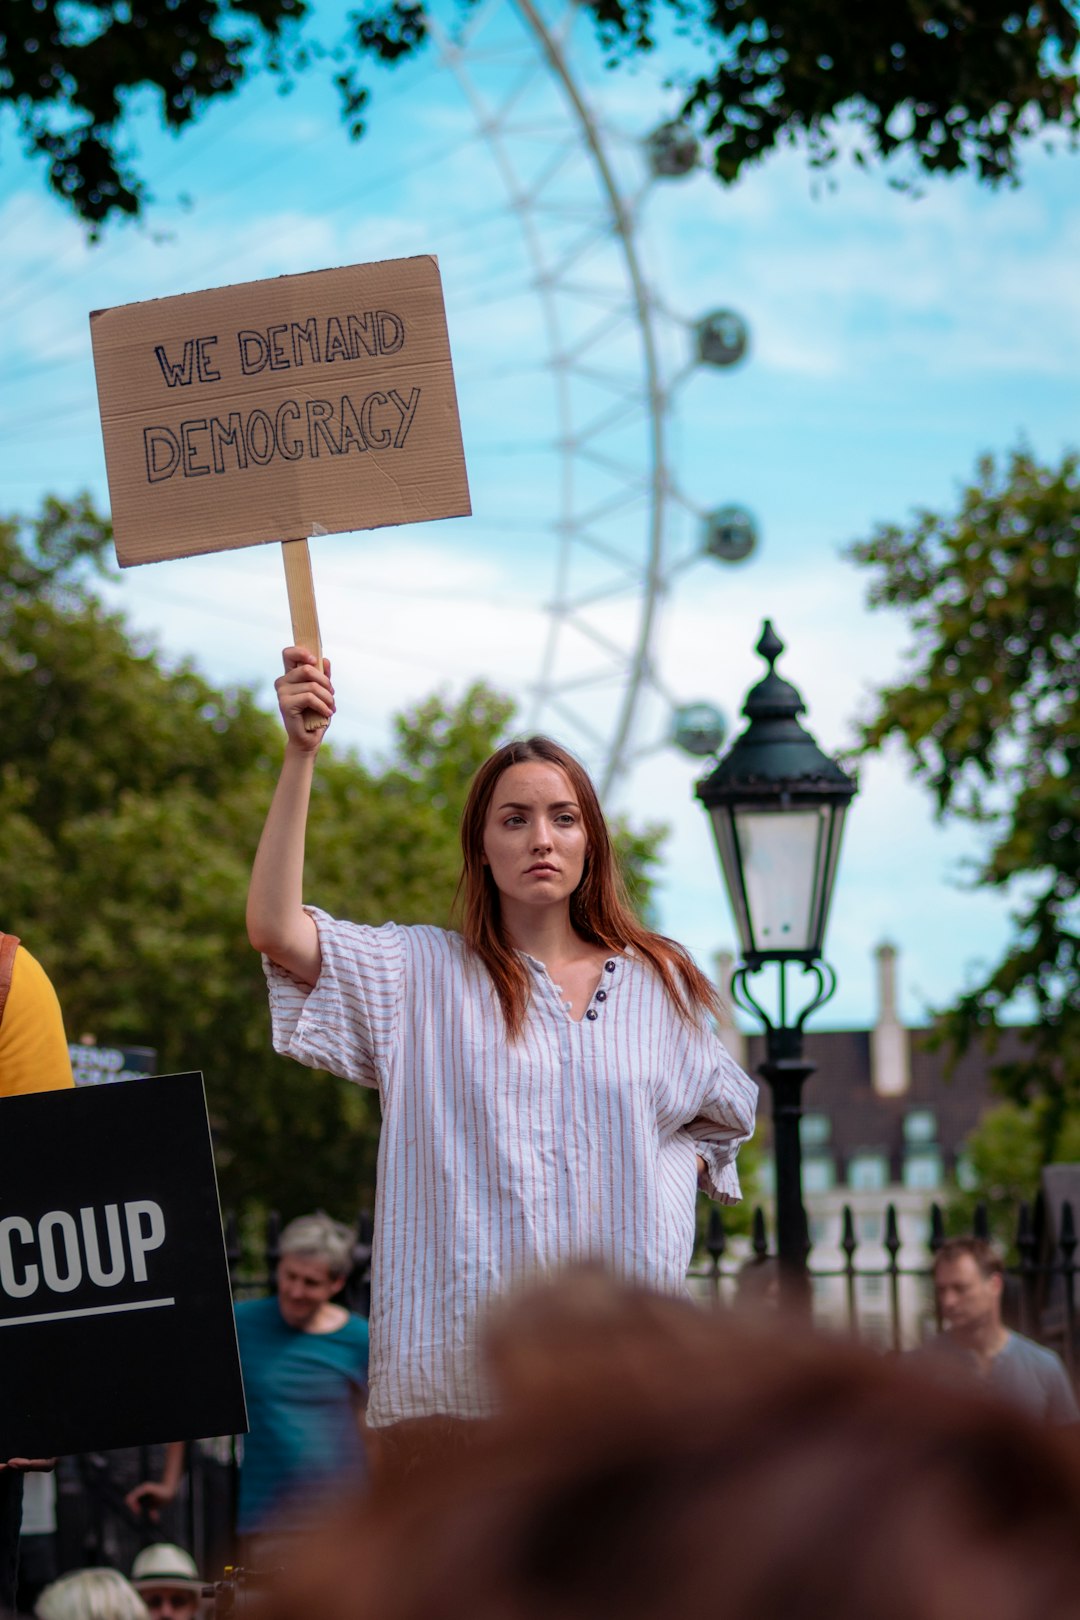 A woman holding a sign saying "We demand democracy".